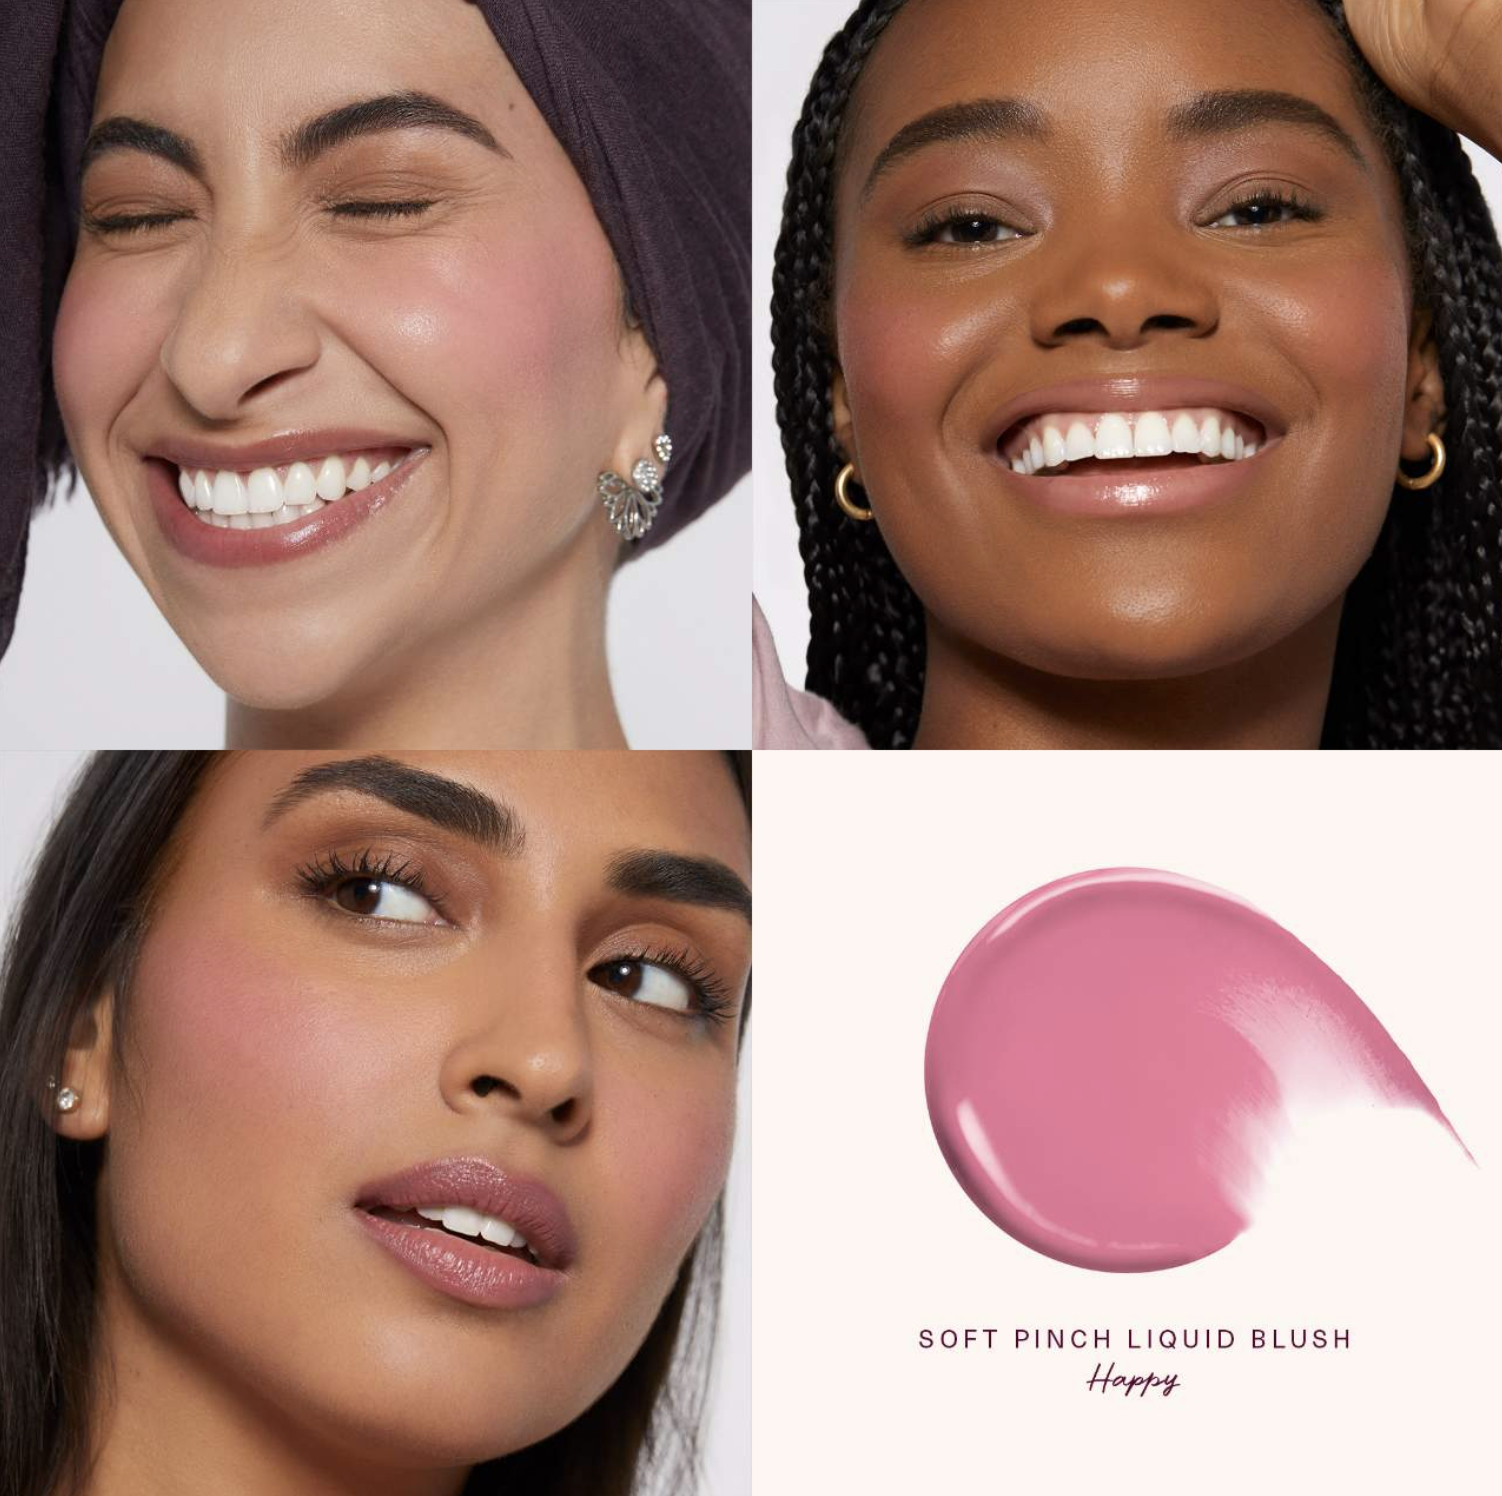 Four images in a collage featuring three smiling models showcasing makeup,and a swatch of pink blush